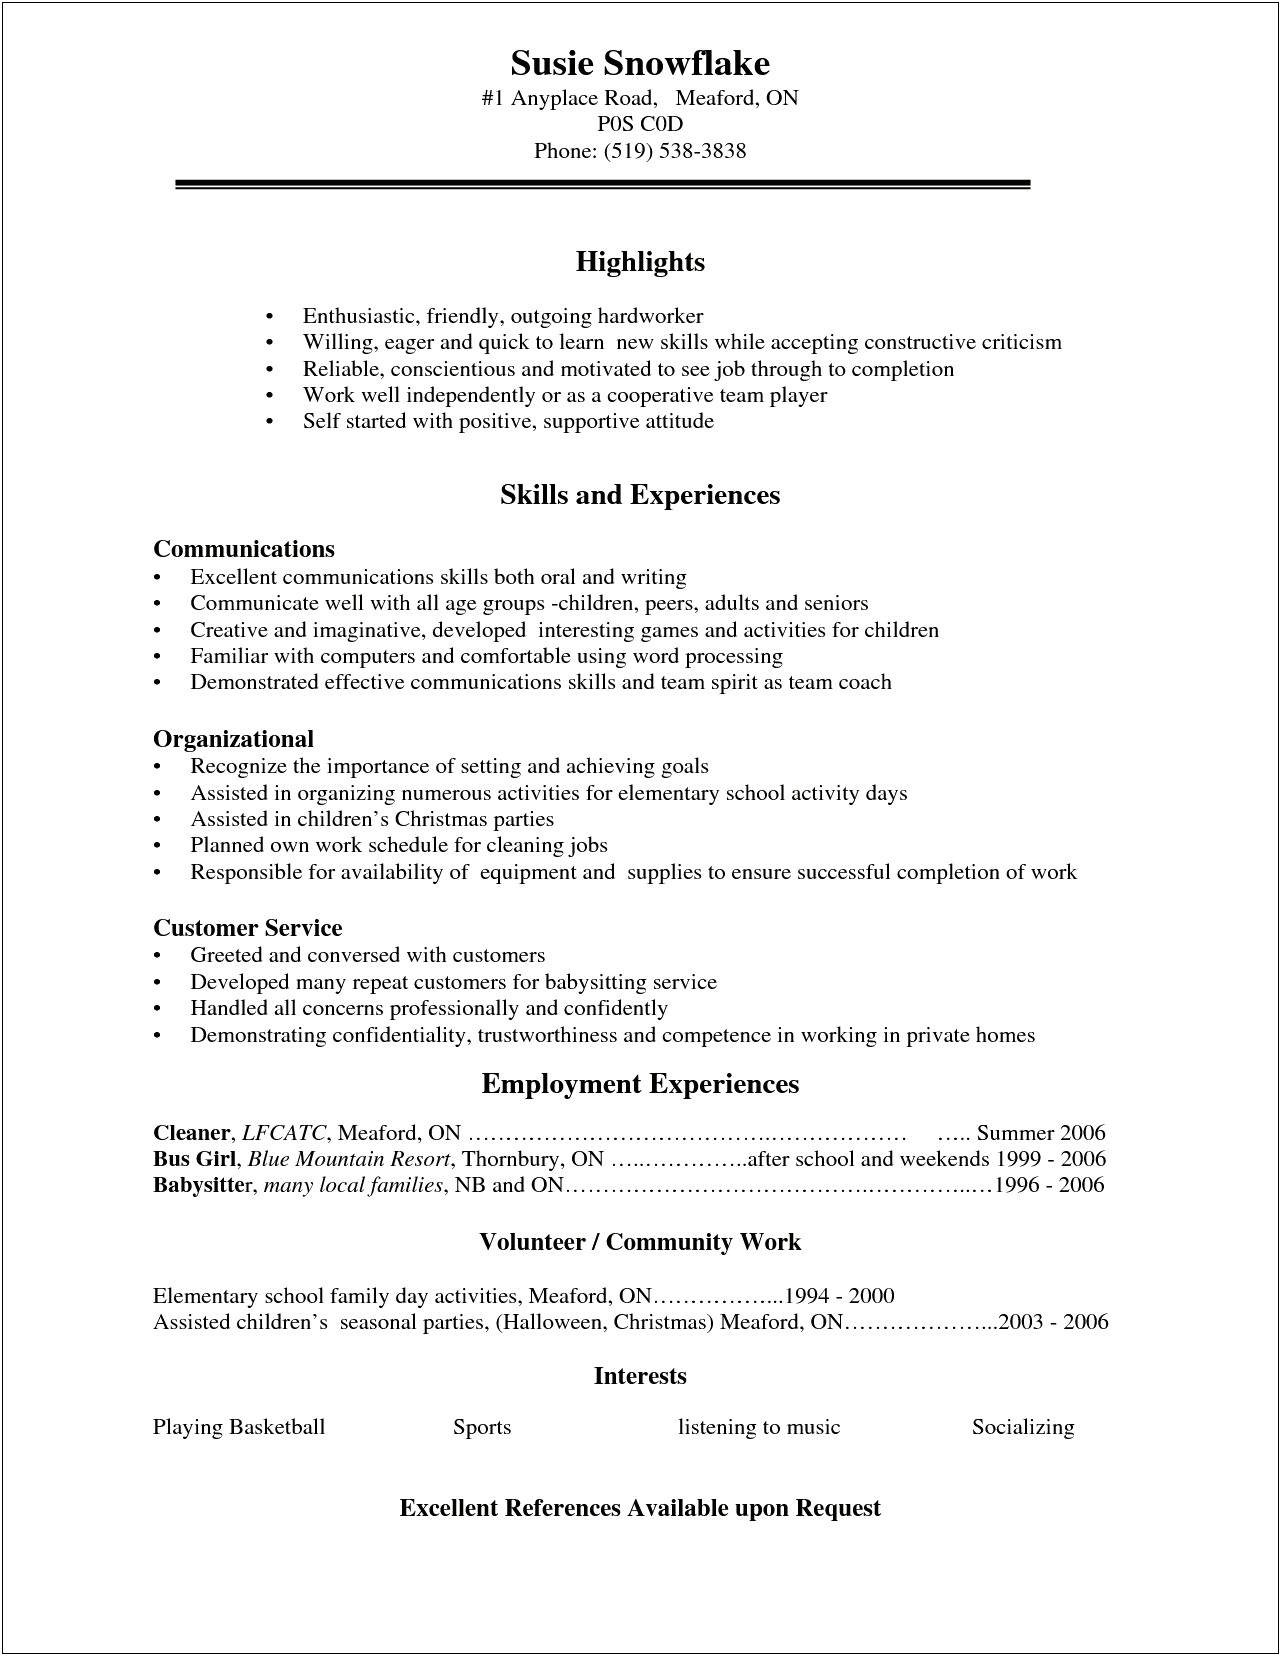 Resume Writing Services For Private Sector Jobs